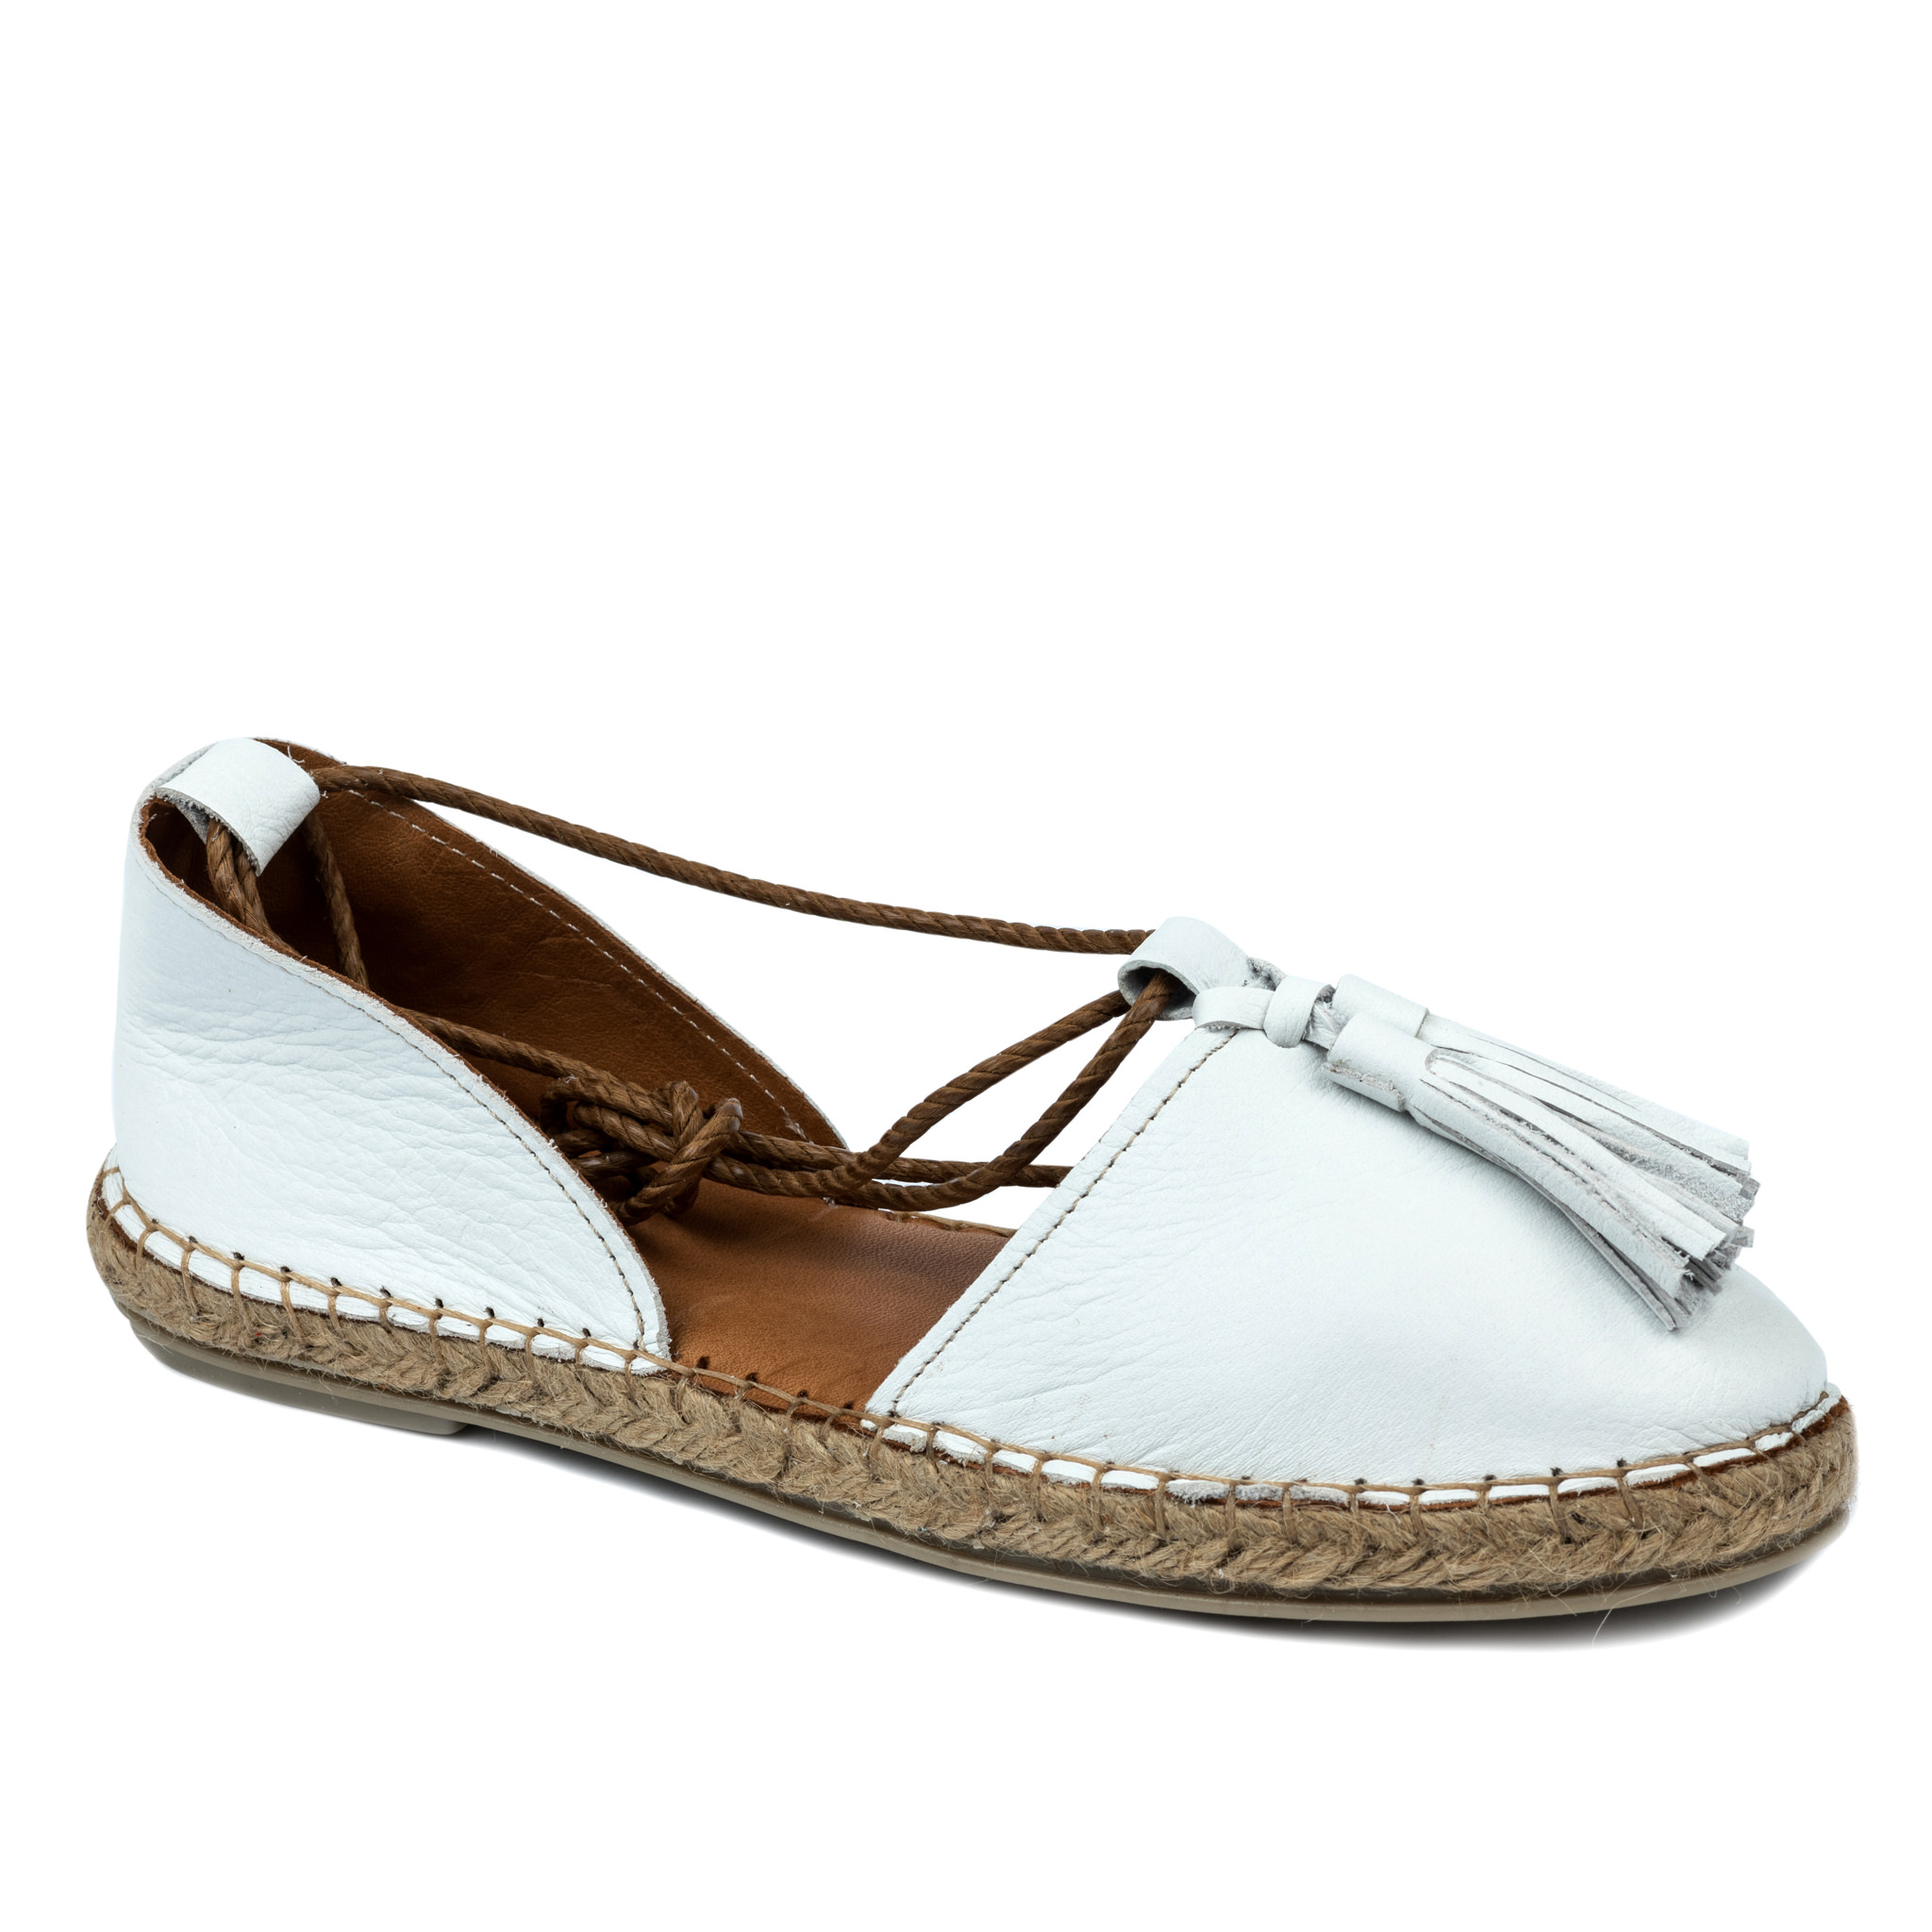 Leather espadrilles A582 - WHITE